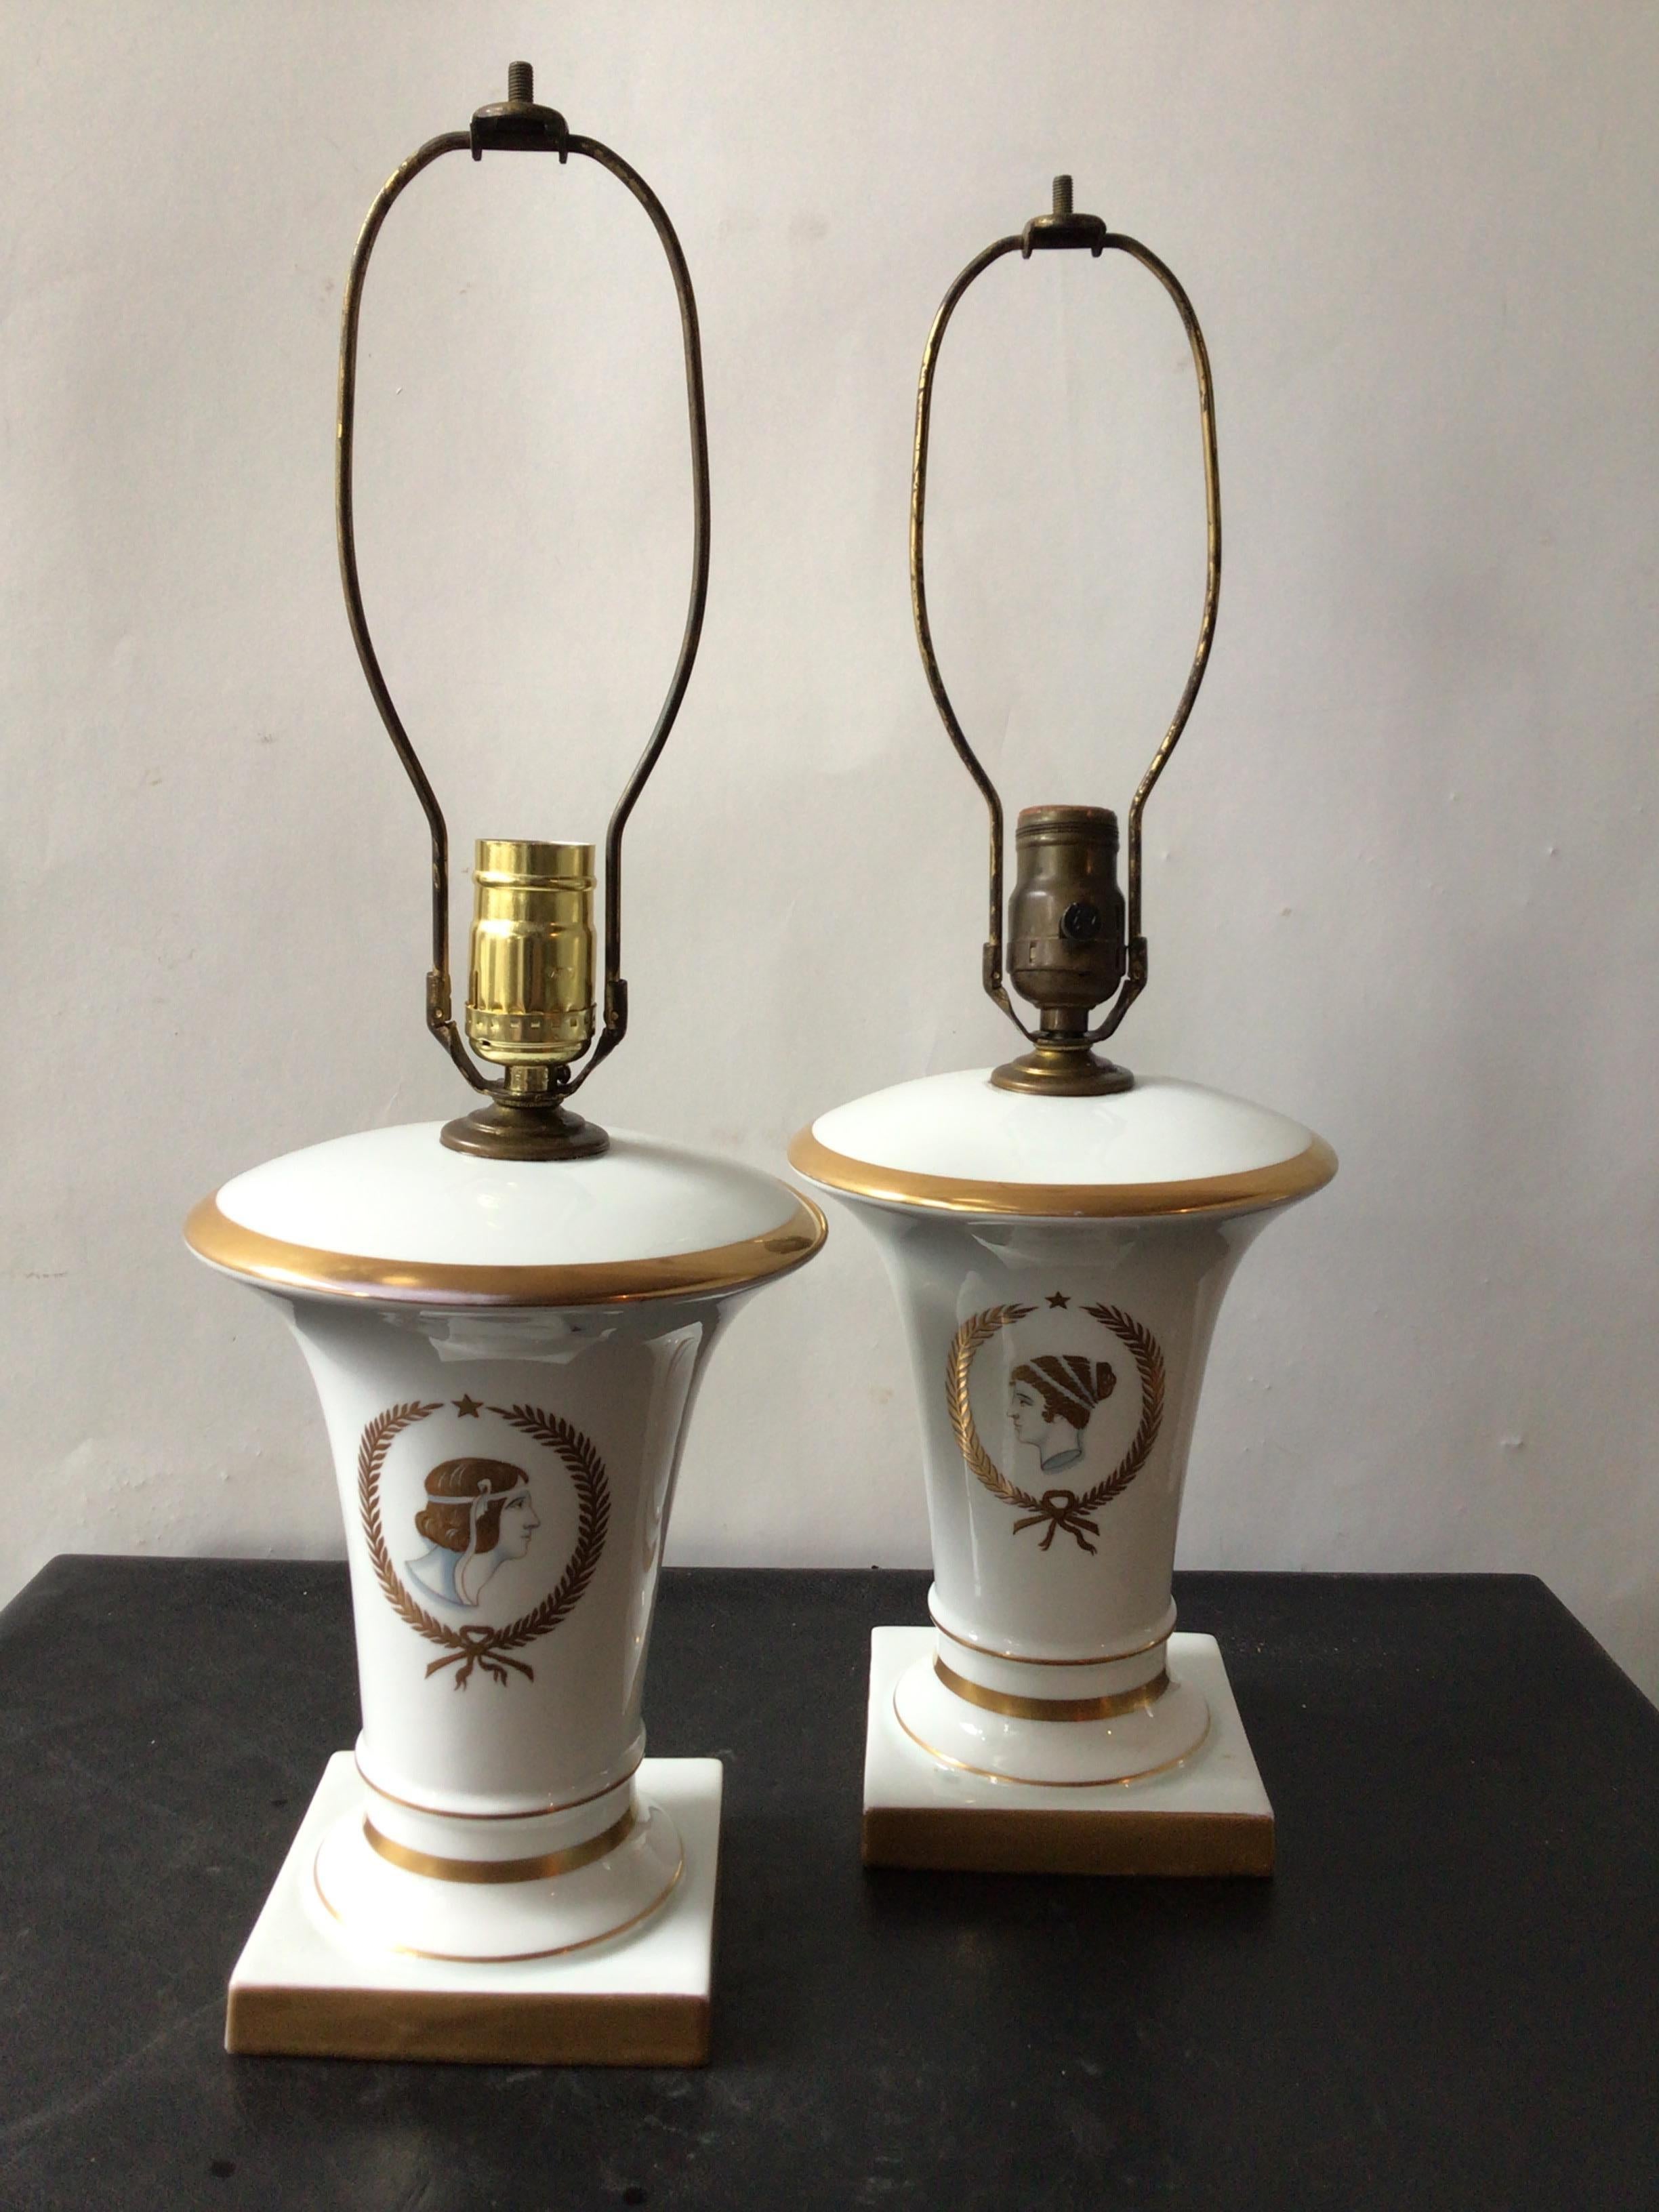 Pair of 1930s hand painted neo classical lamps on porcelain urns. Gilt trim.